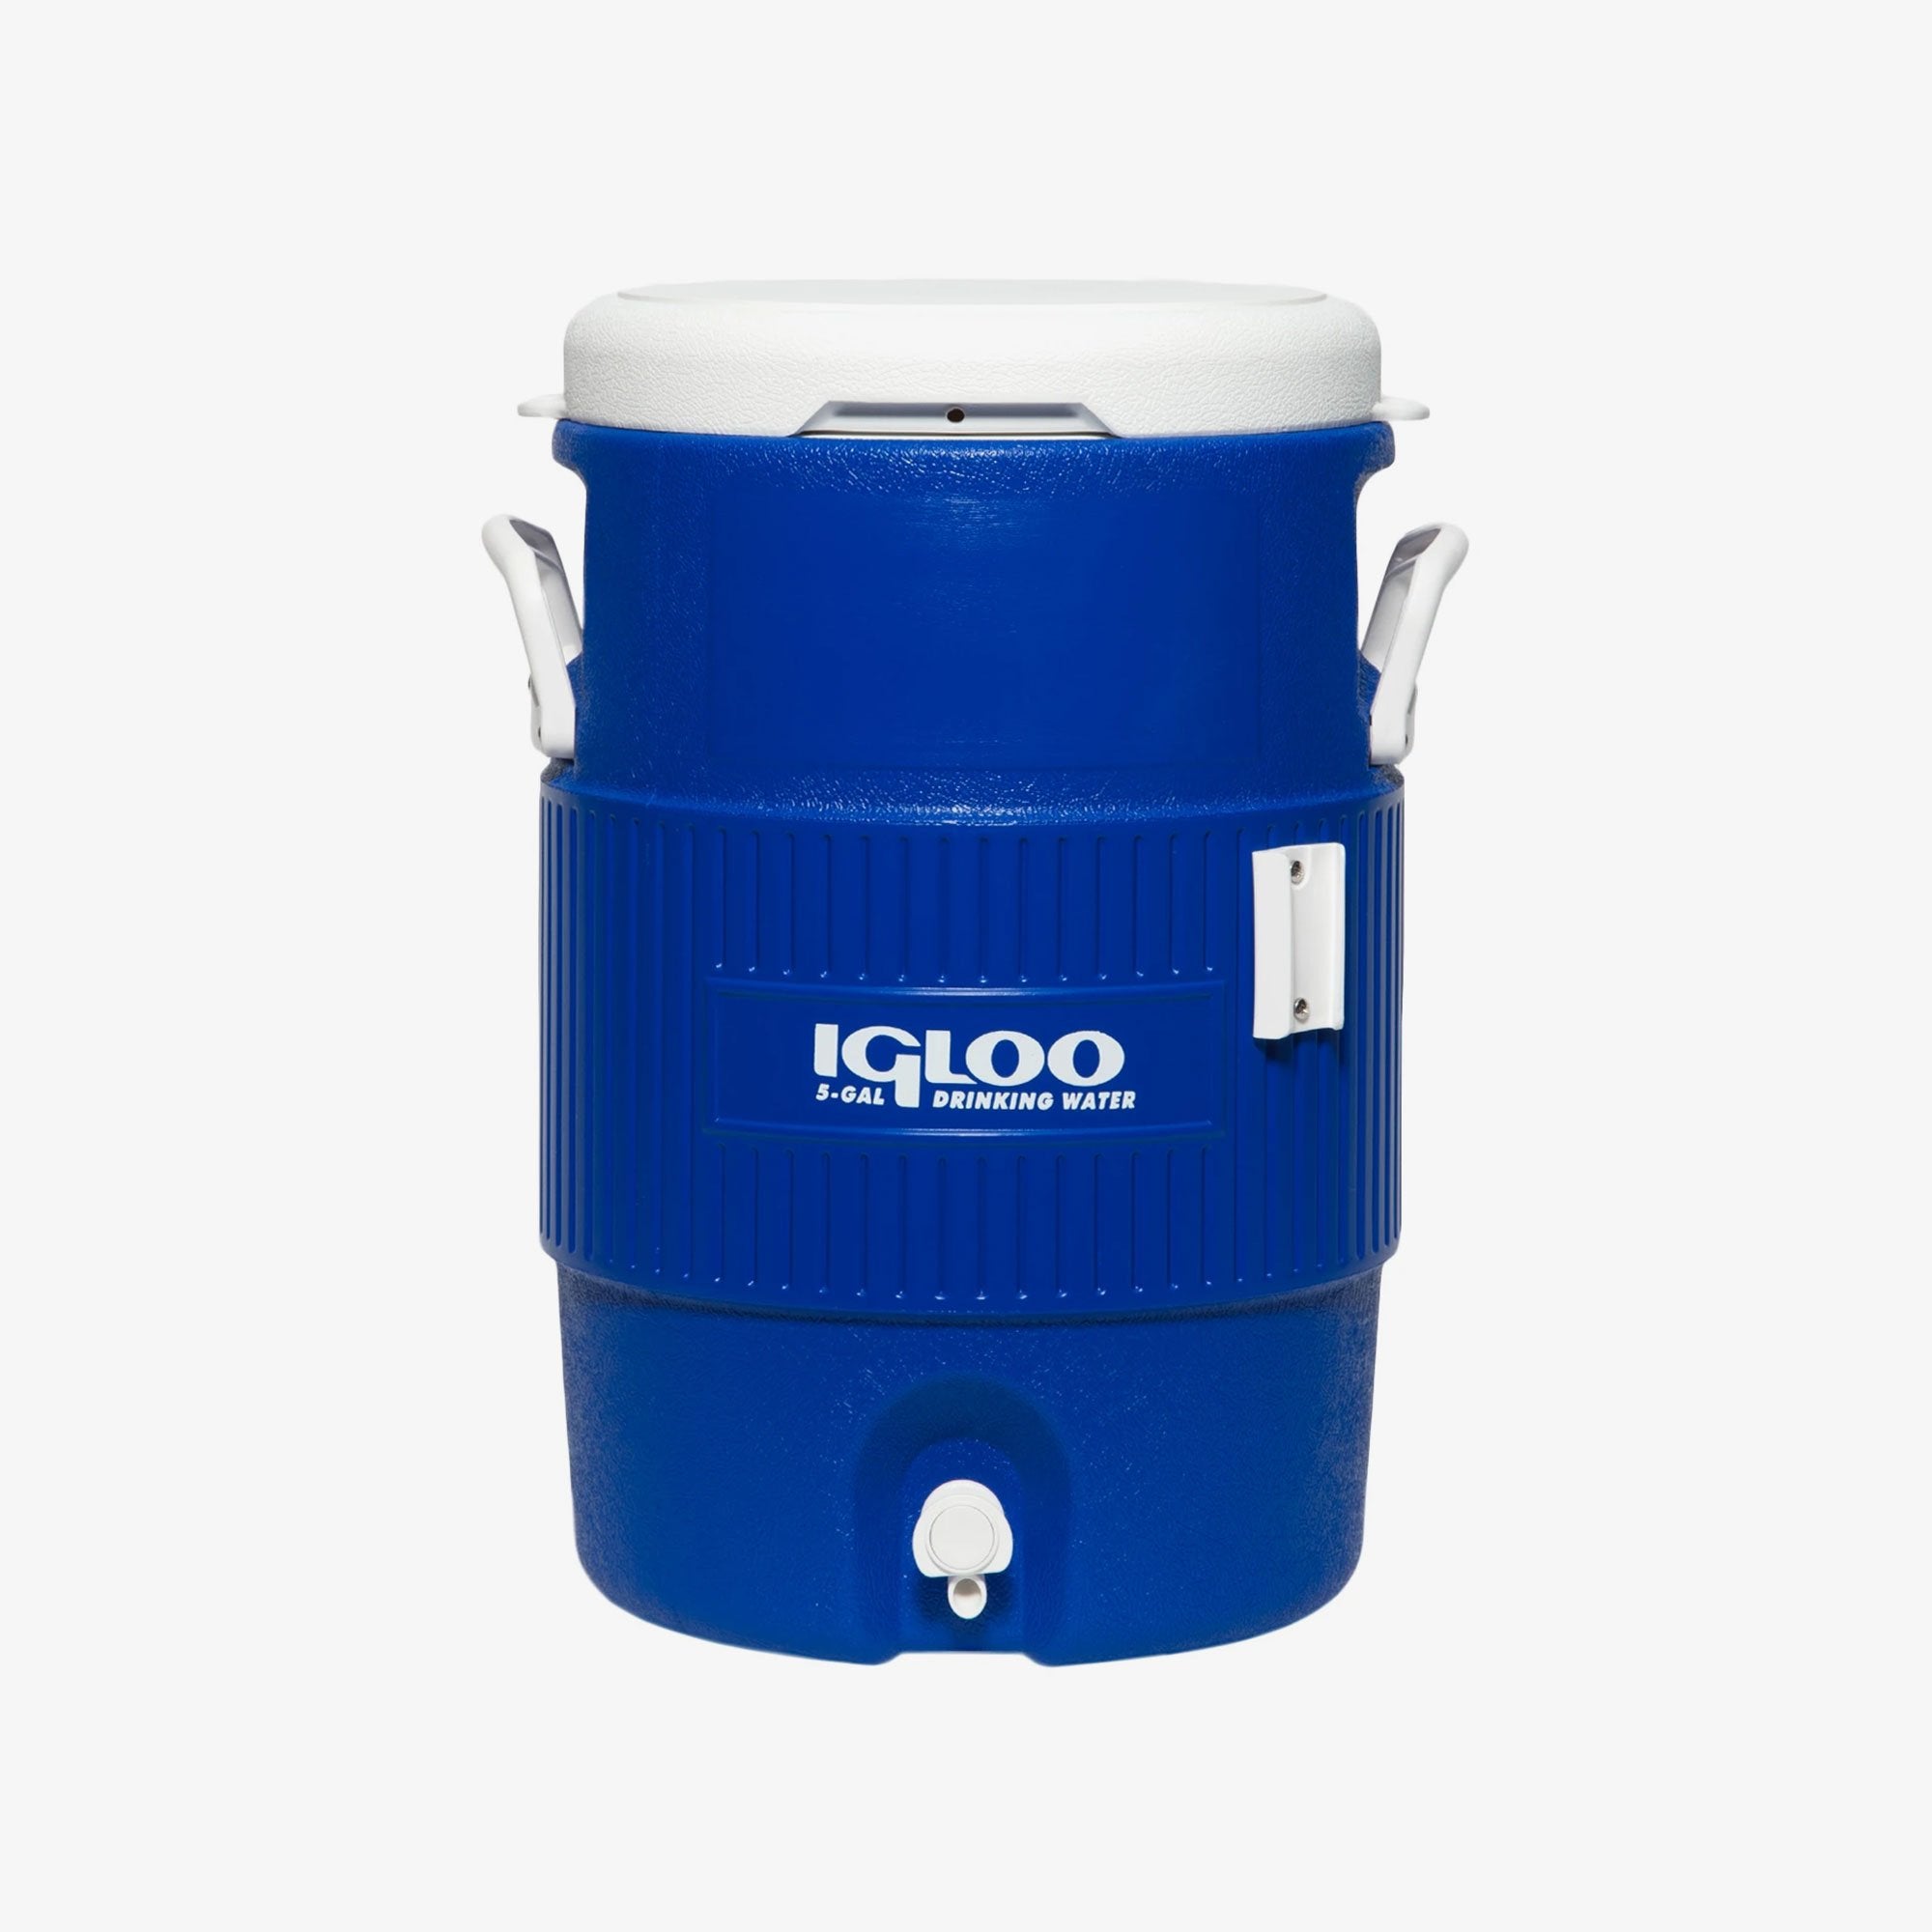 Plastic 5 gallon water jugs, are they damaged by freezing?